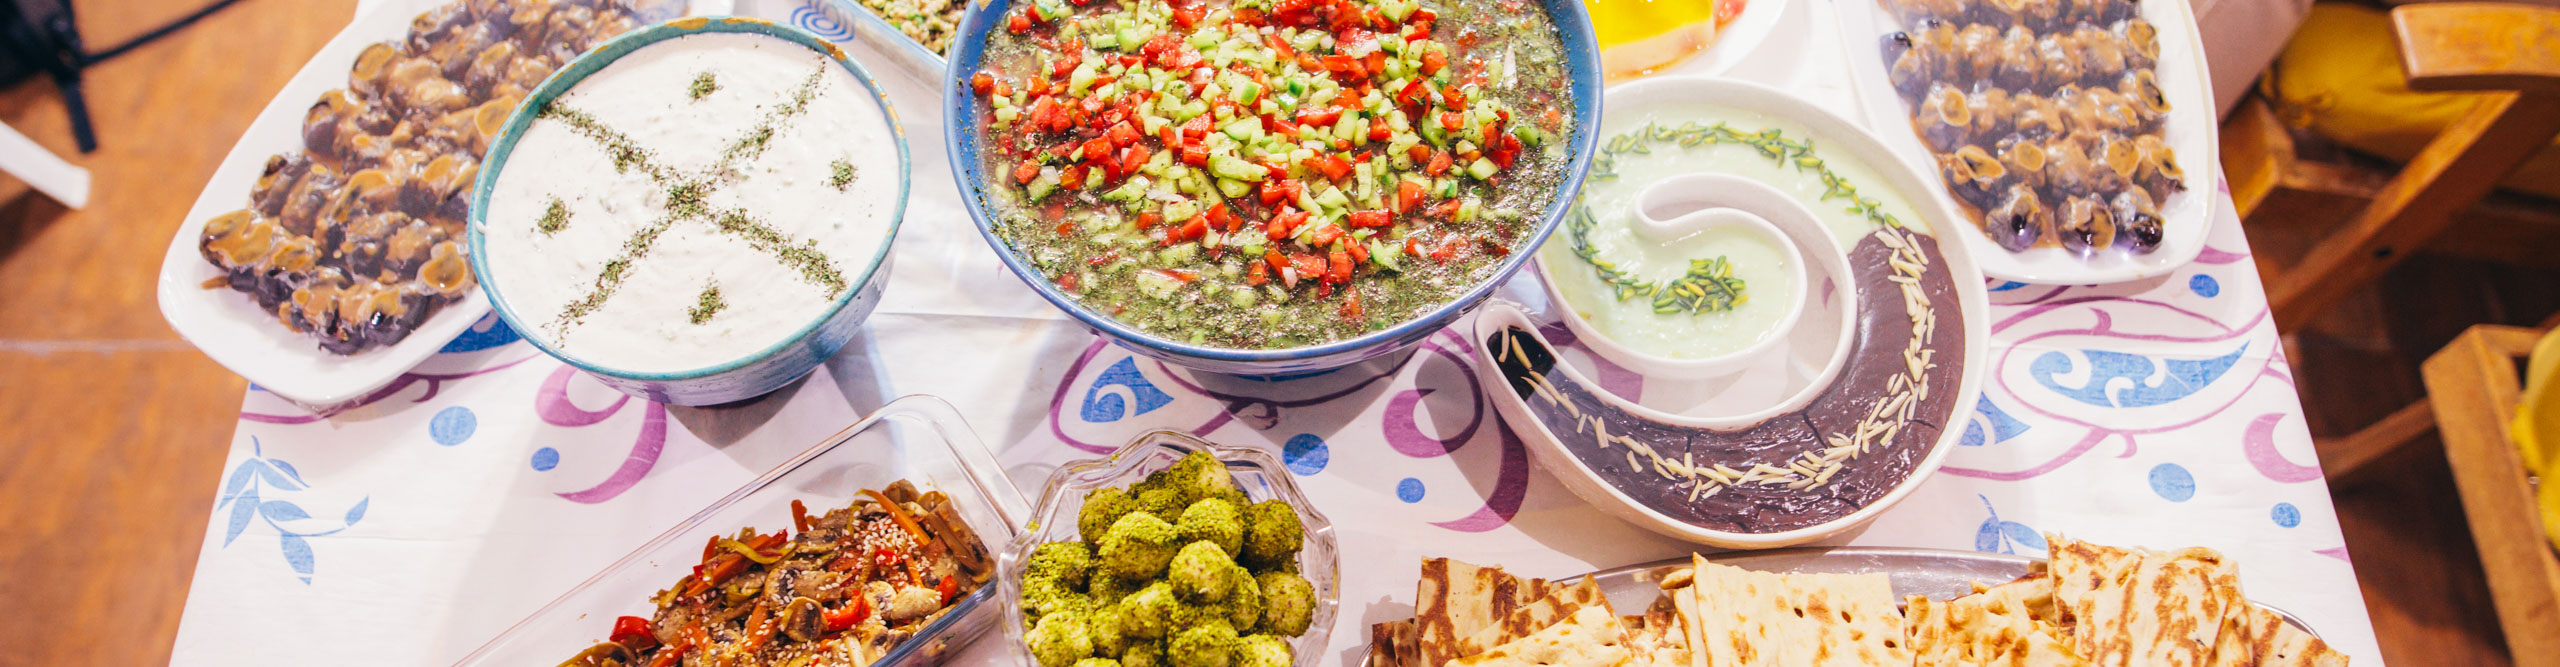 A table covered with various Middle Eastern dishes in Iran